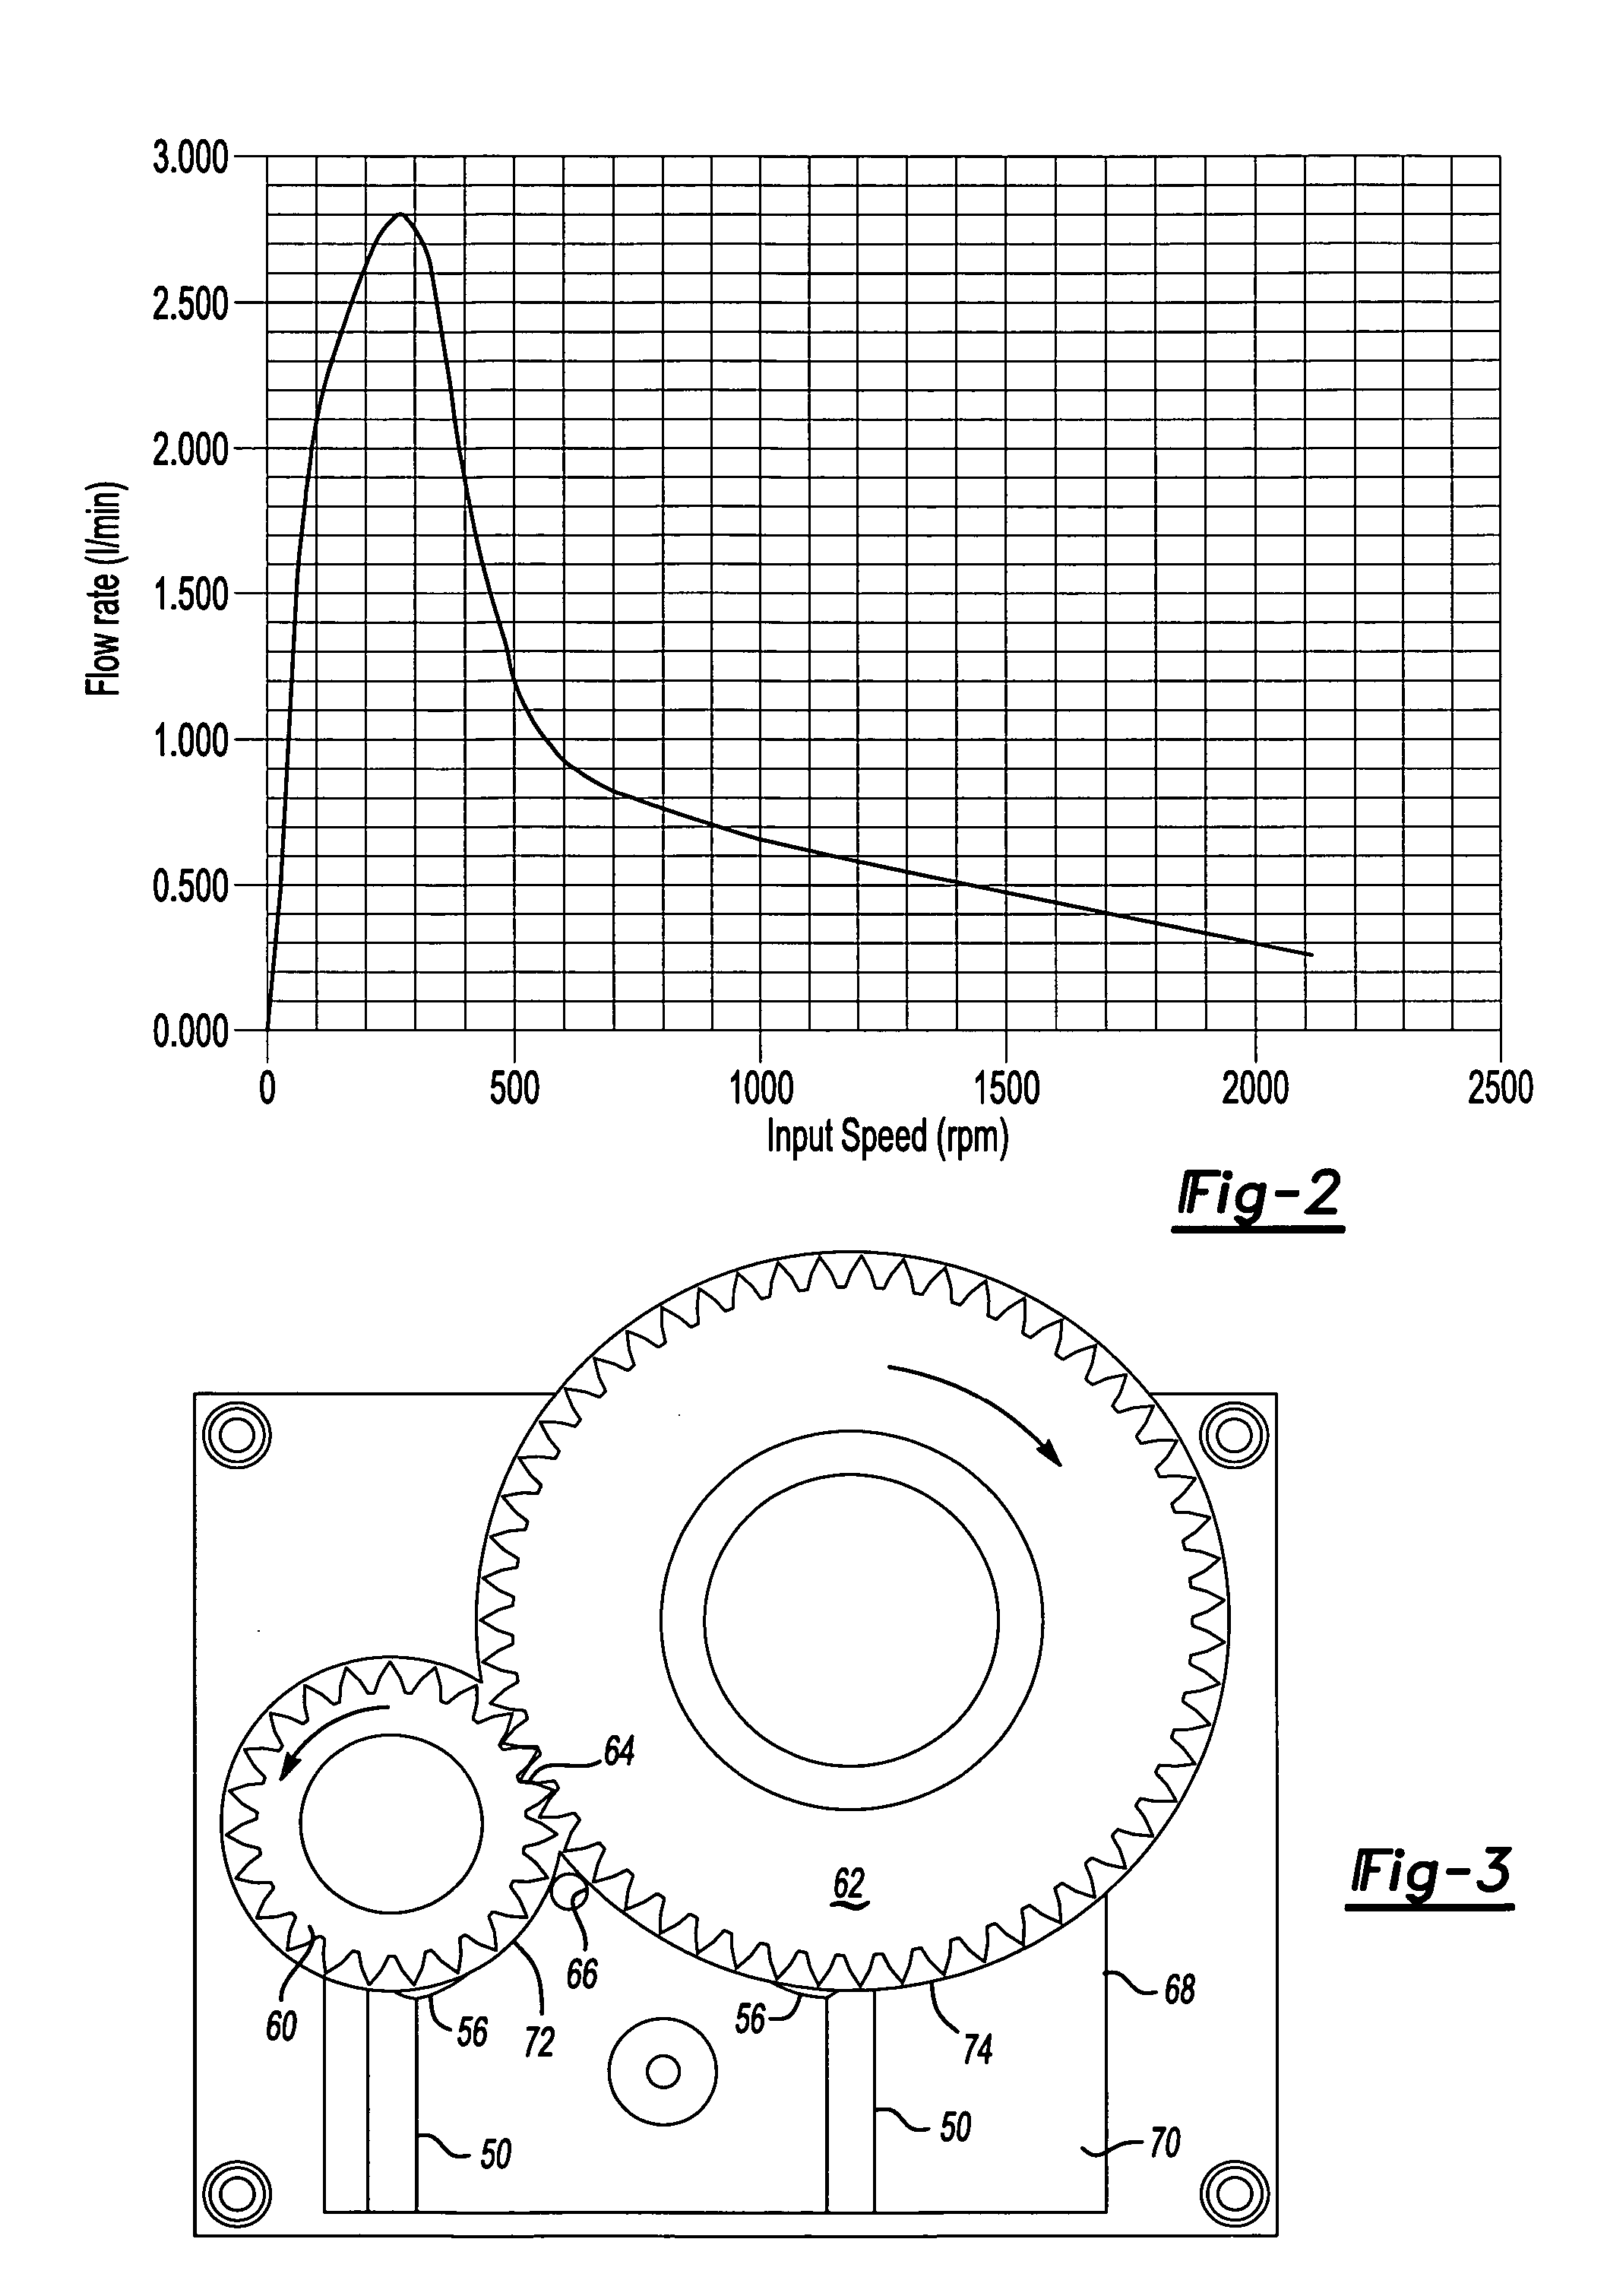 Ancillary oil pumping for gear box assembly